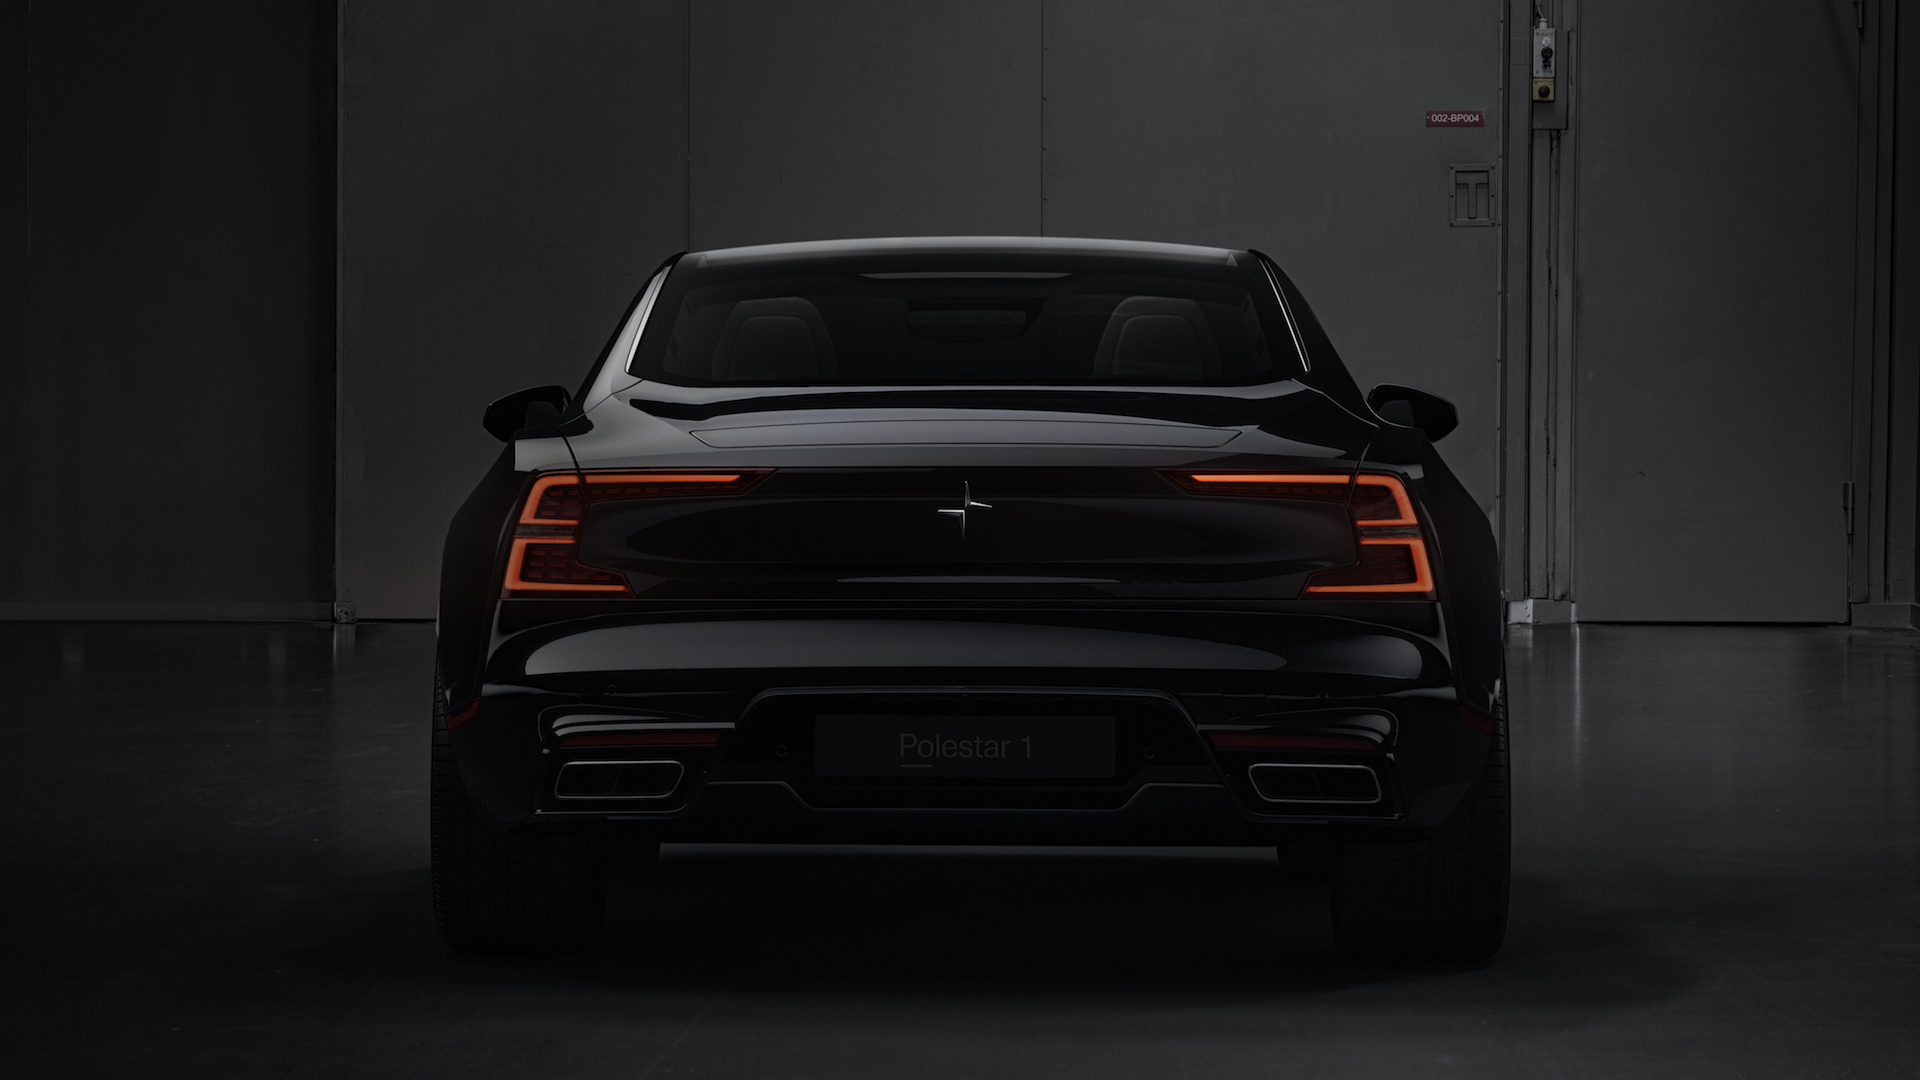 volvos new polestar electric car brand to launch 600 hp model in 2019